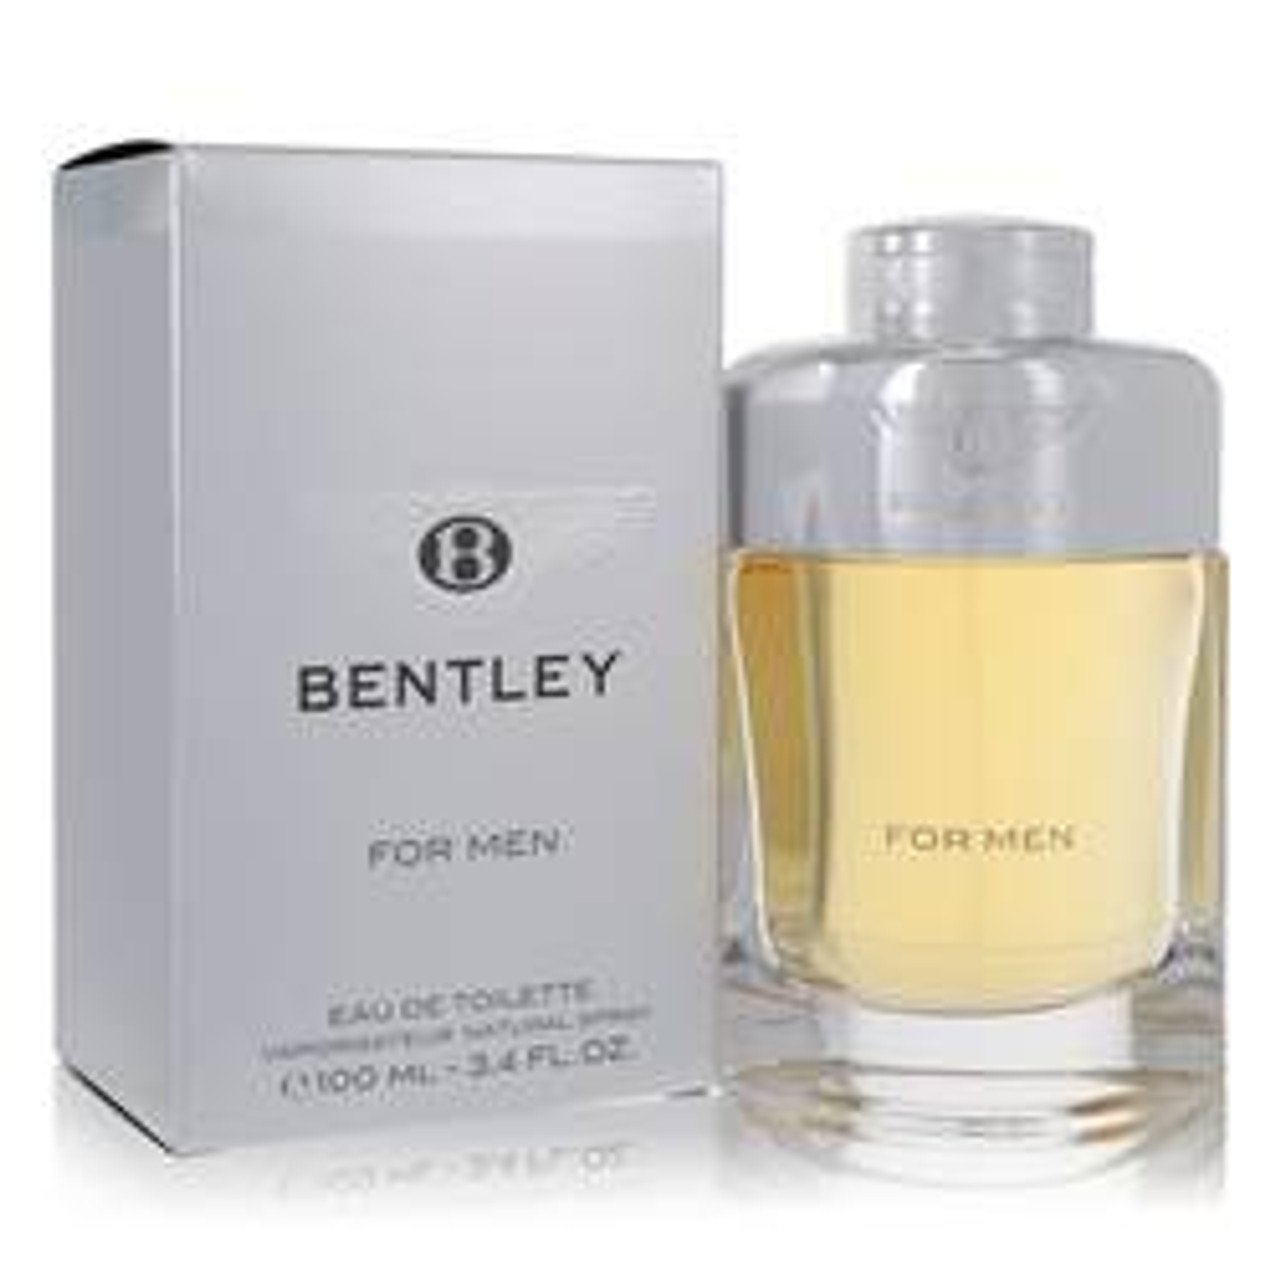 Bentley Cologne By Bentley Eau De Toilette Spray 3.4 oz for Men - [From 79.50 - Choose pk Qty ] - *Ships from Miami